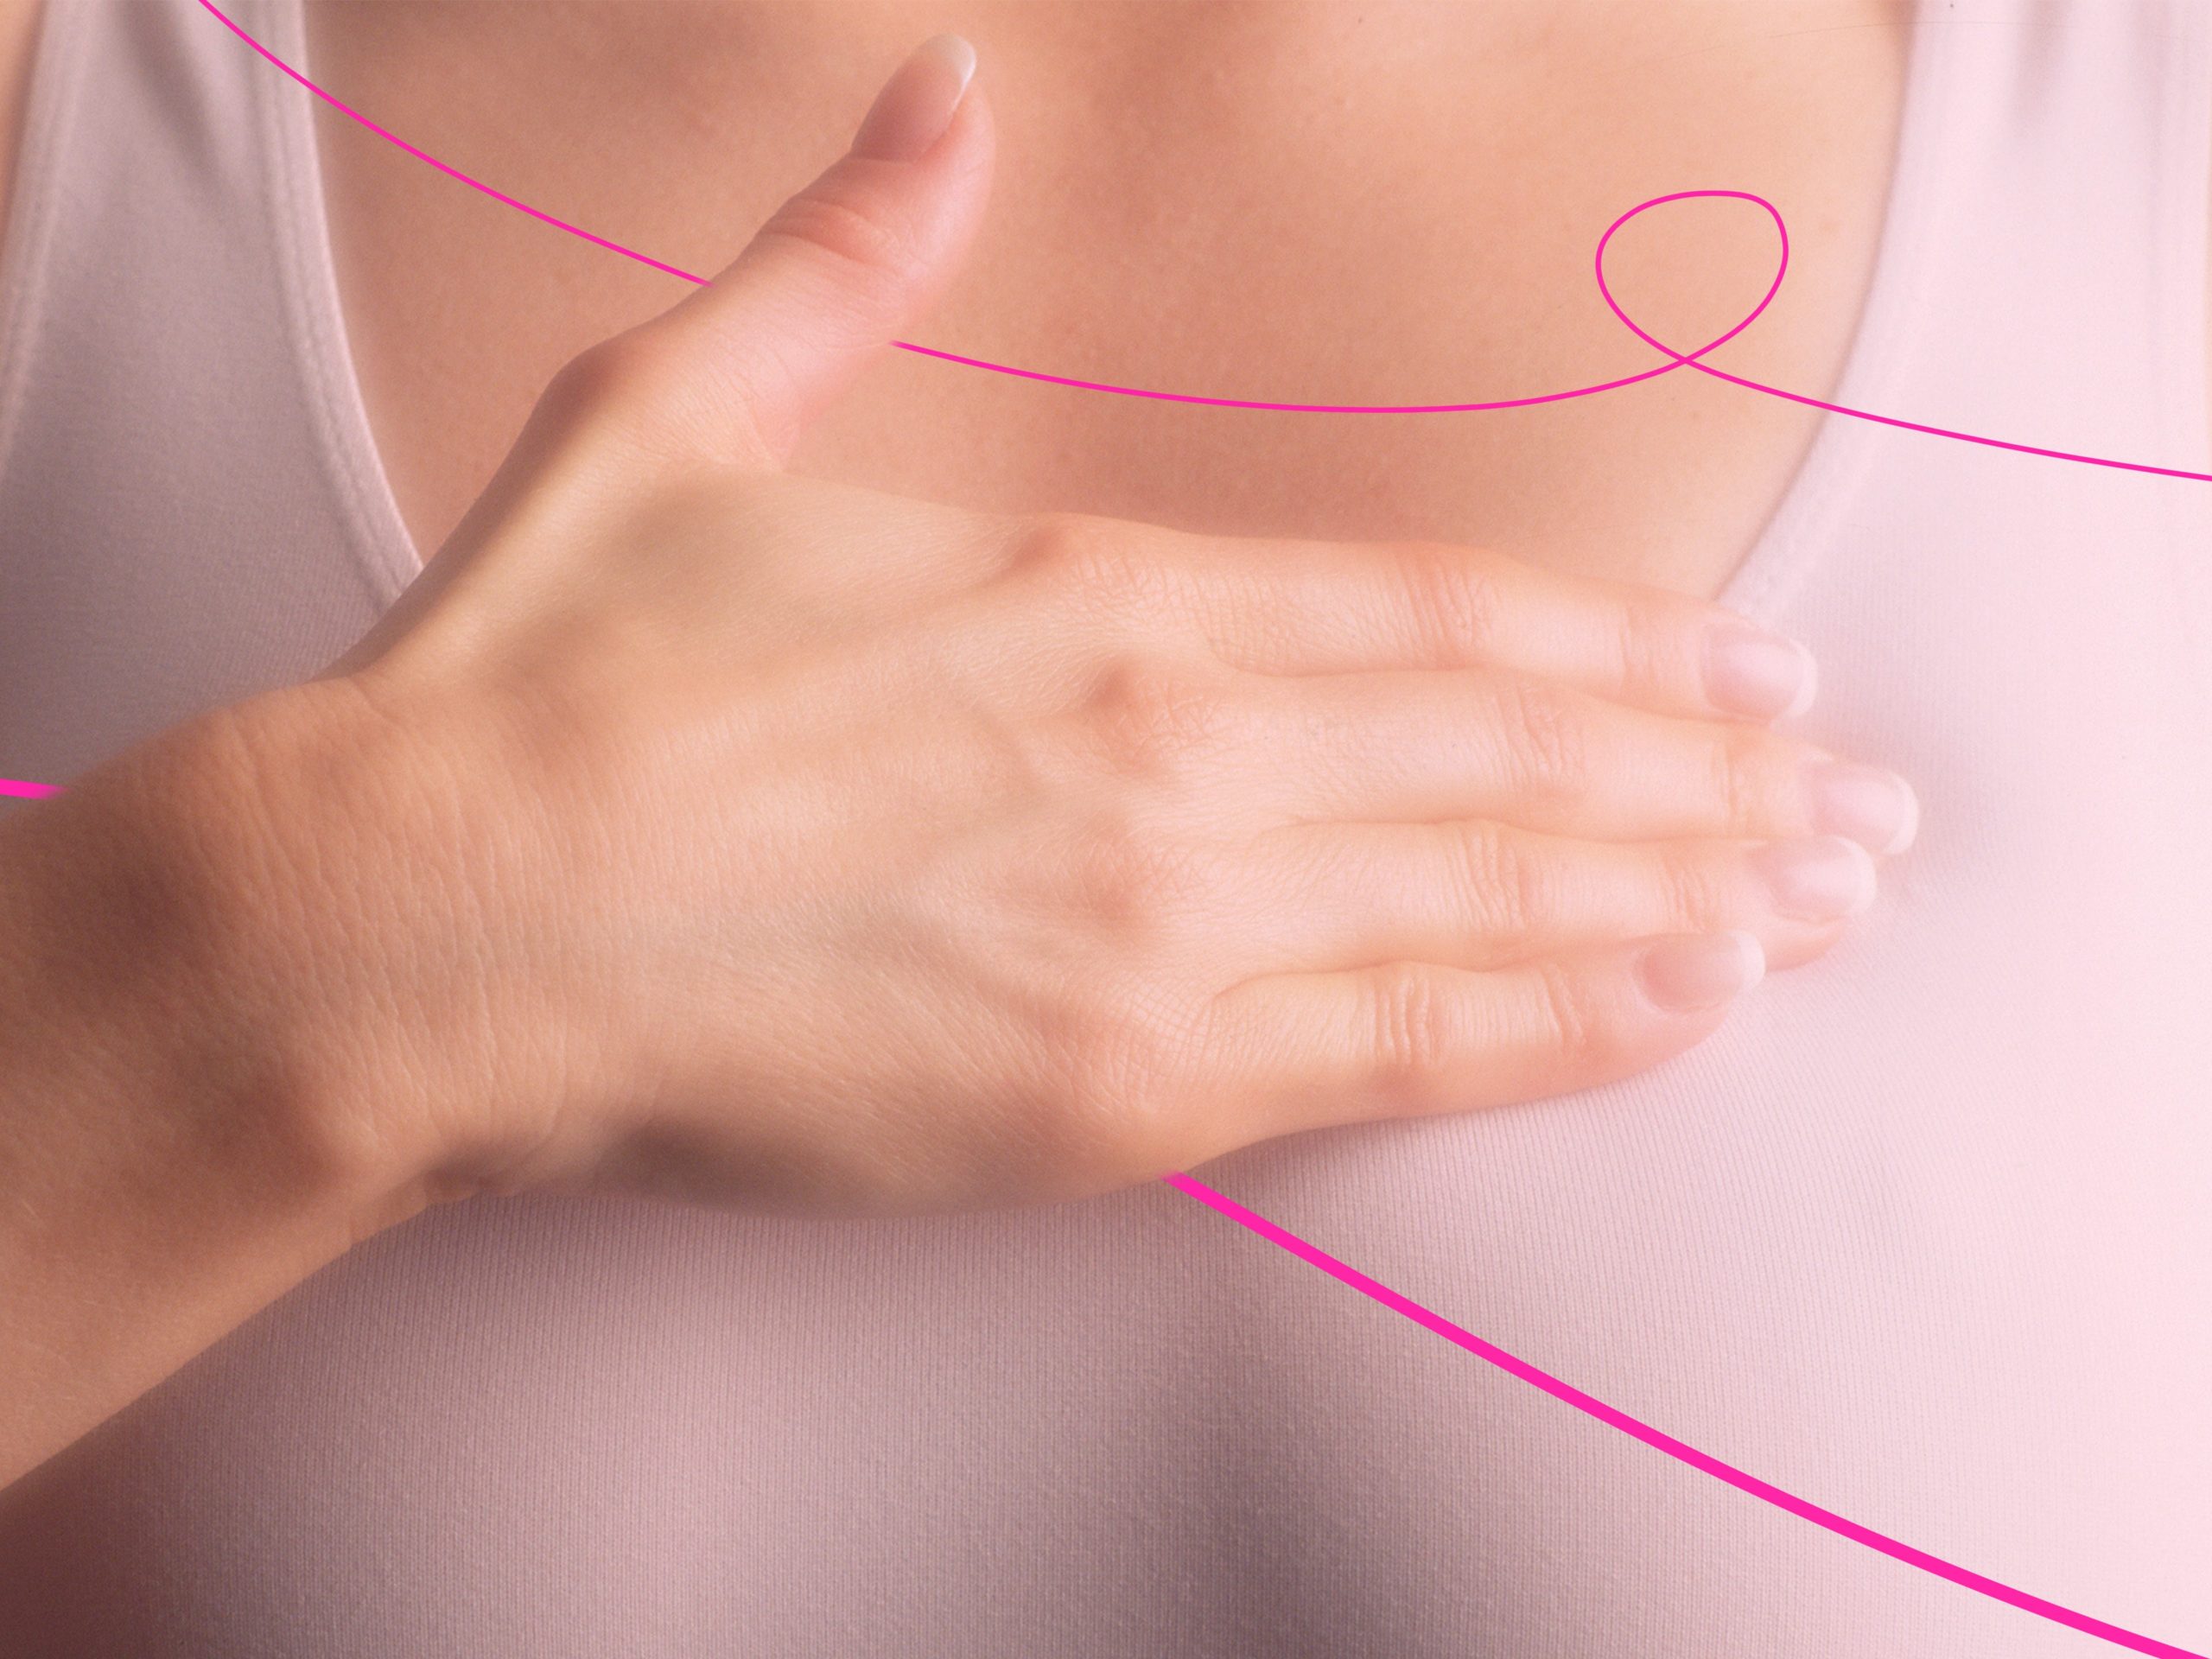 5 Signs You Might Have Breast Cancer